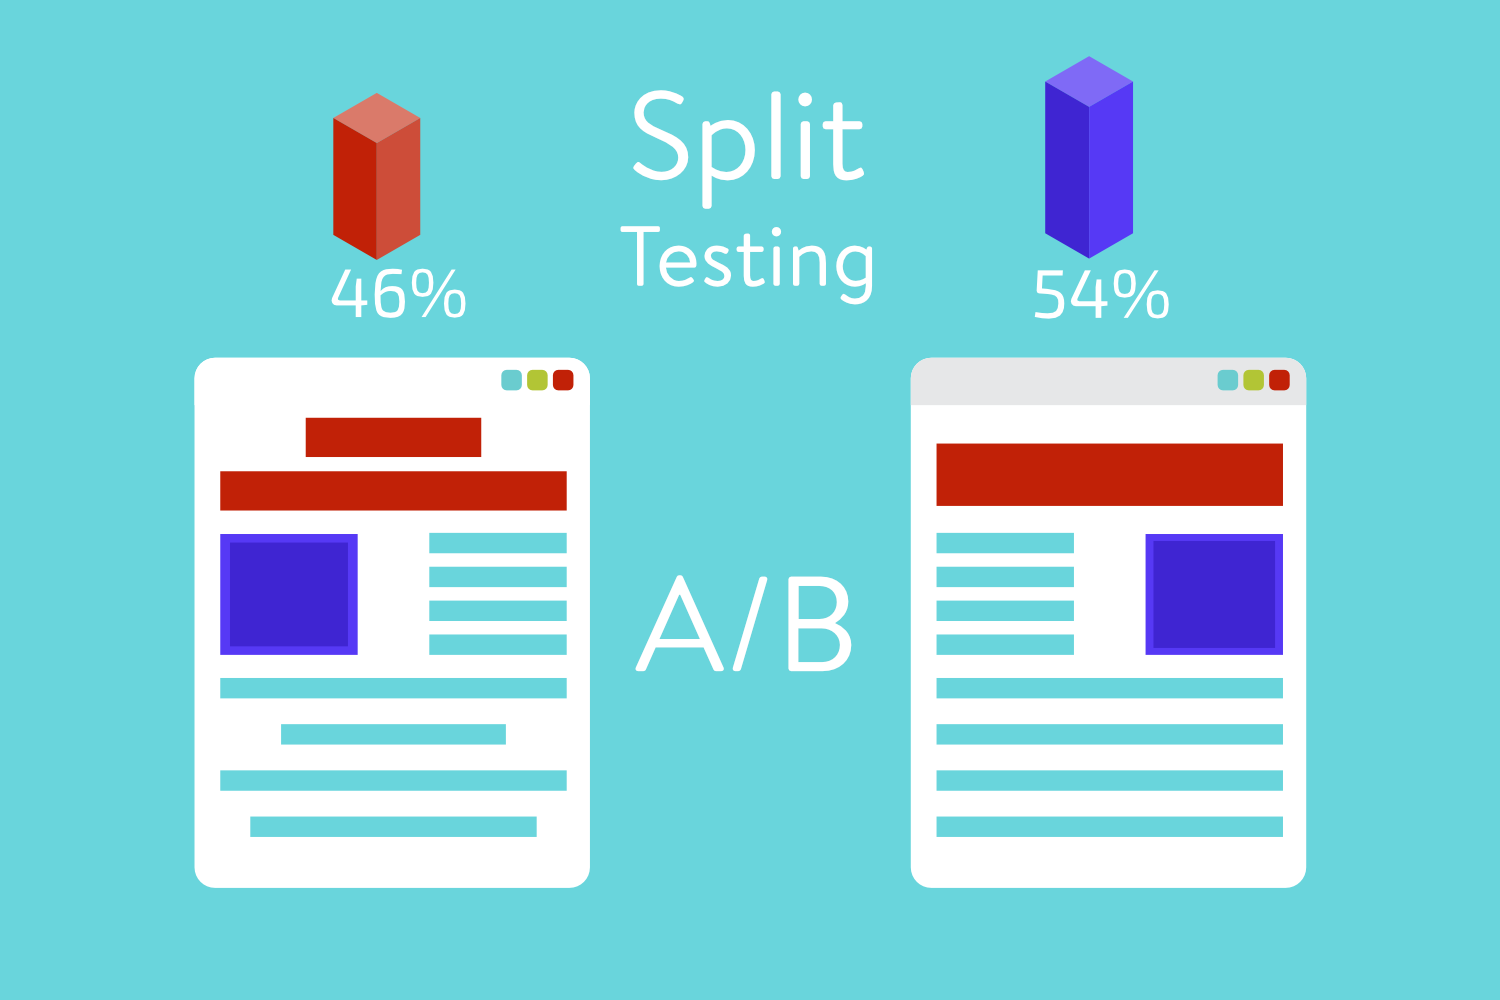 What is A/B Testing?